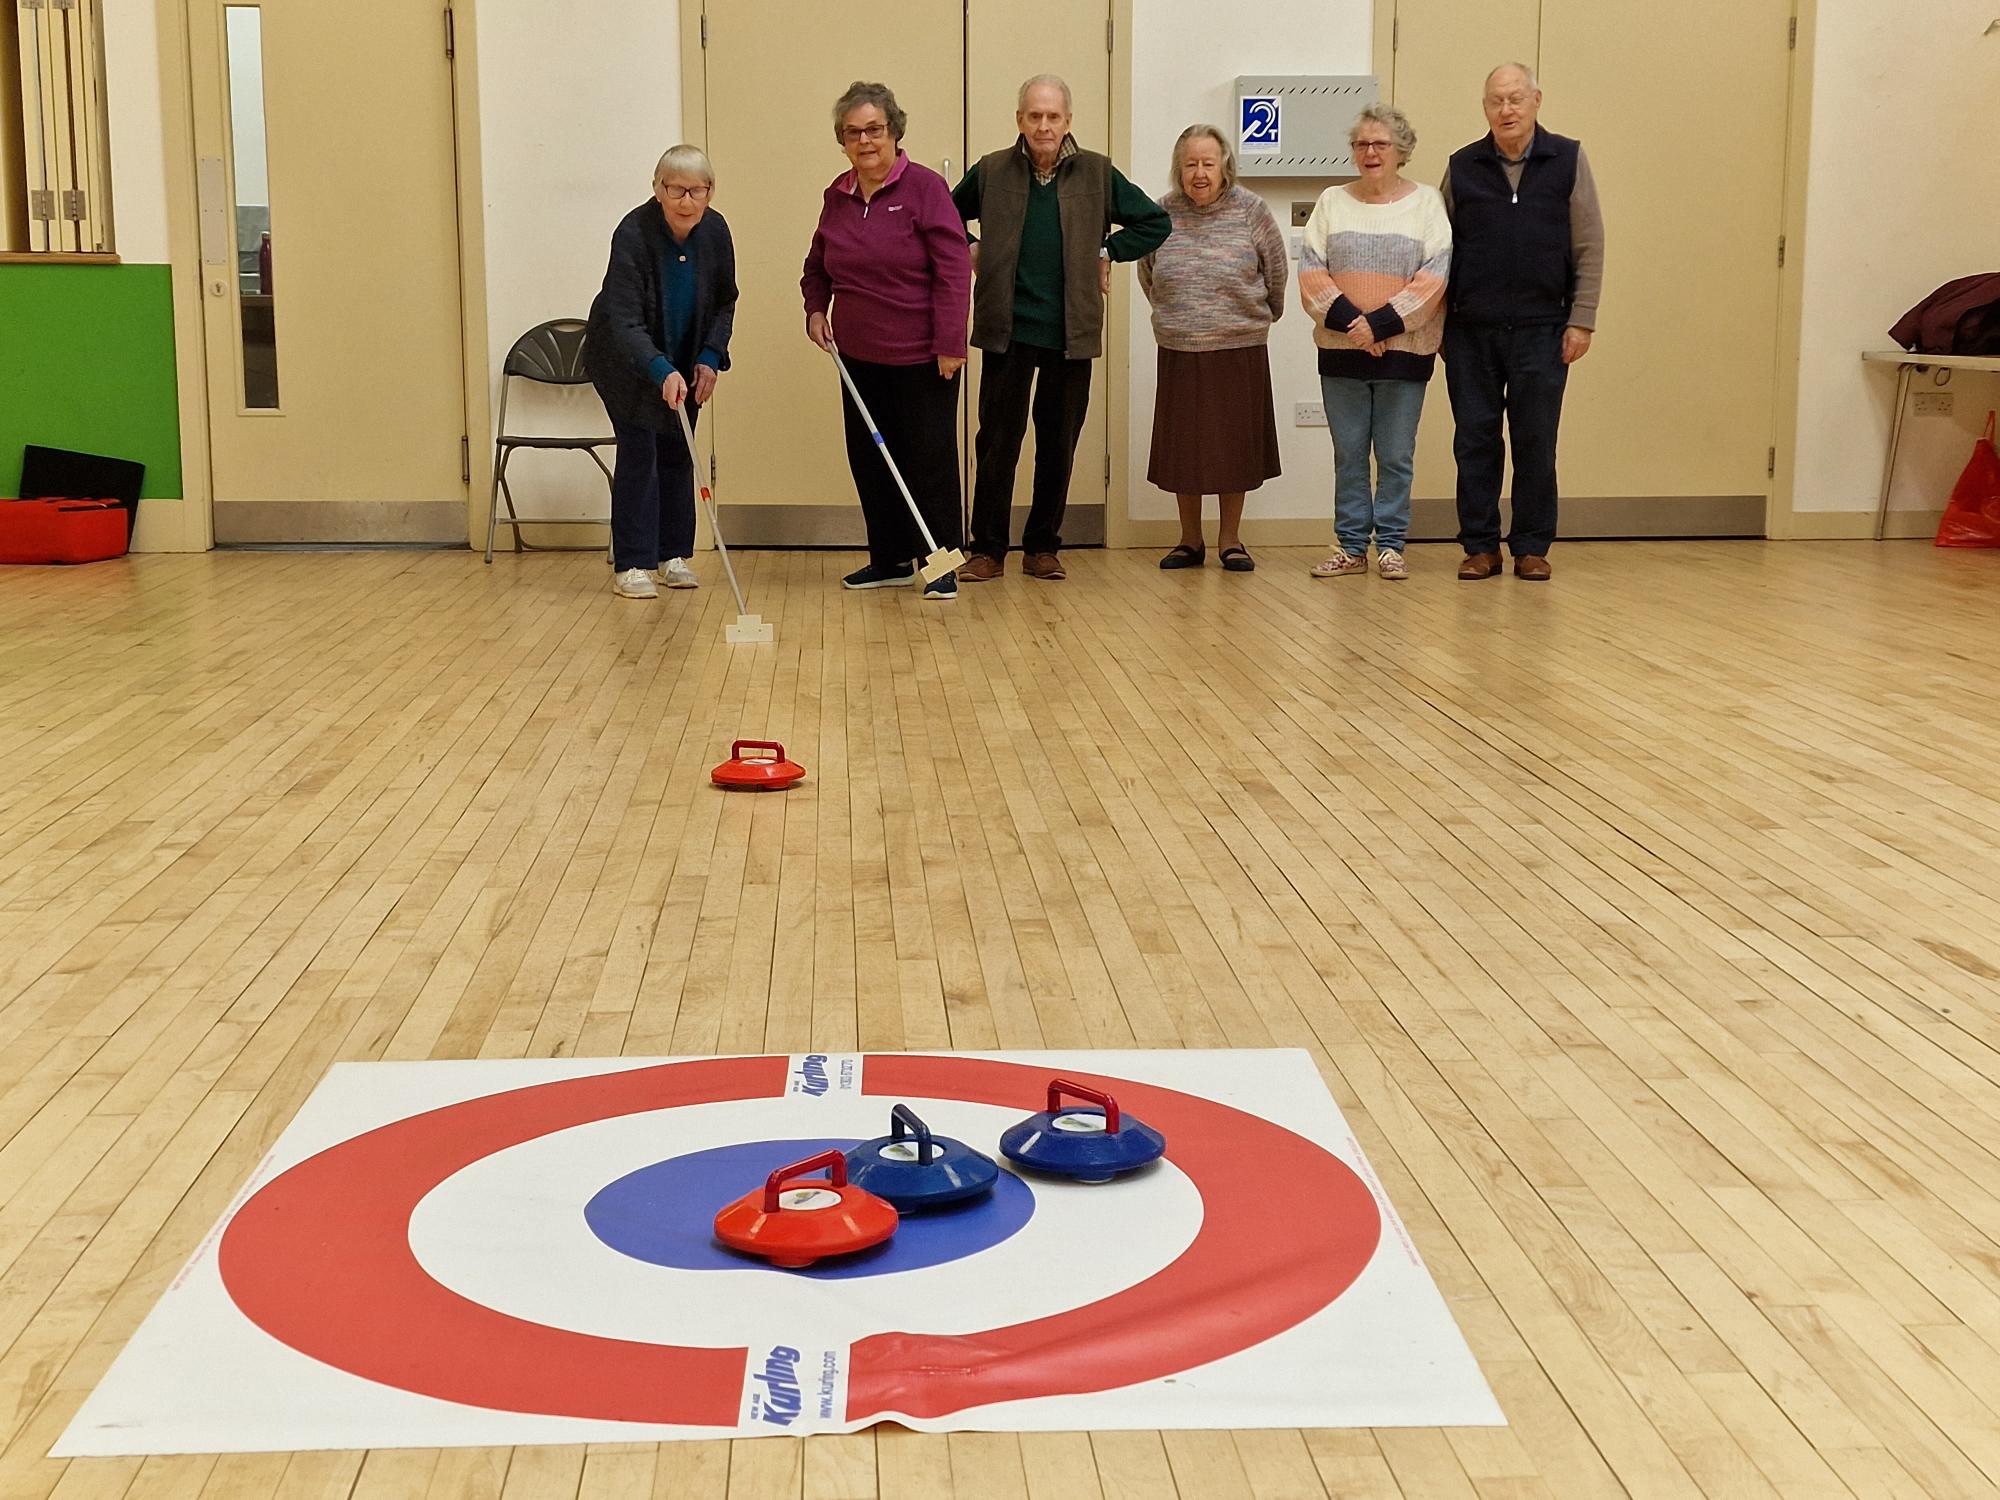 A group of people standing behind a mat marked with circles. One of them is pushing a kurling stone towards the mat.